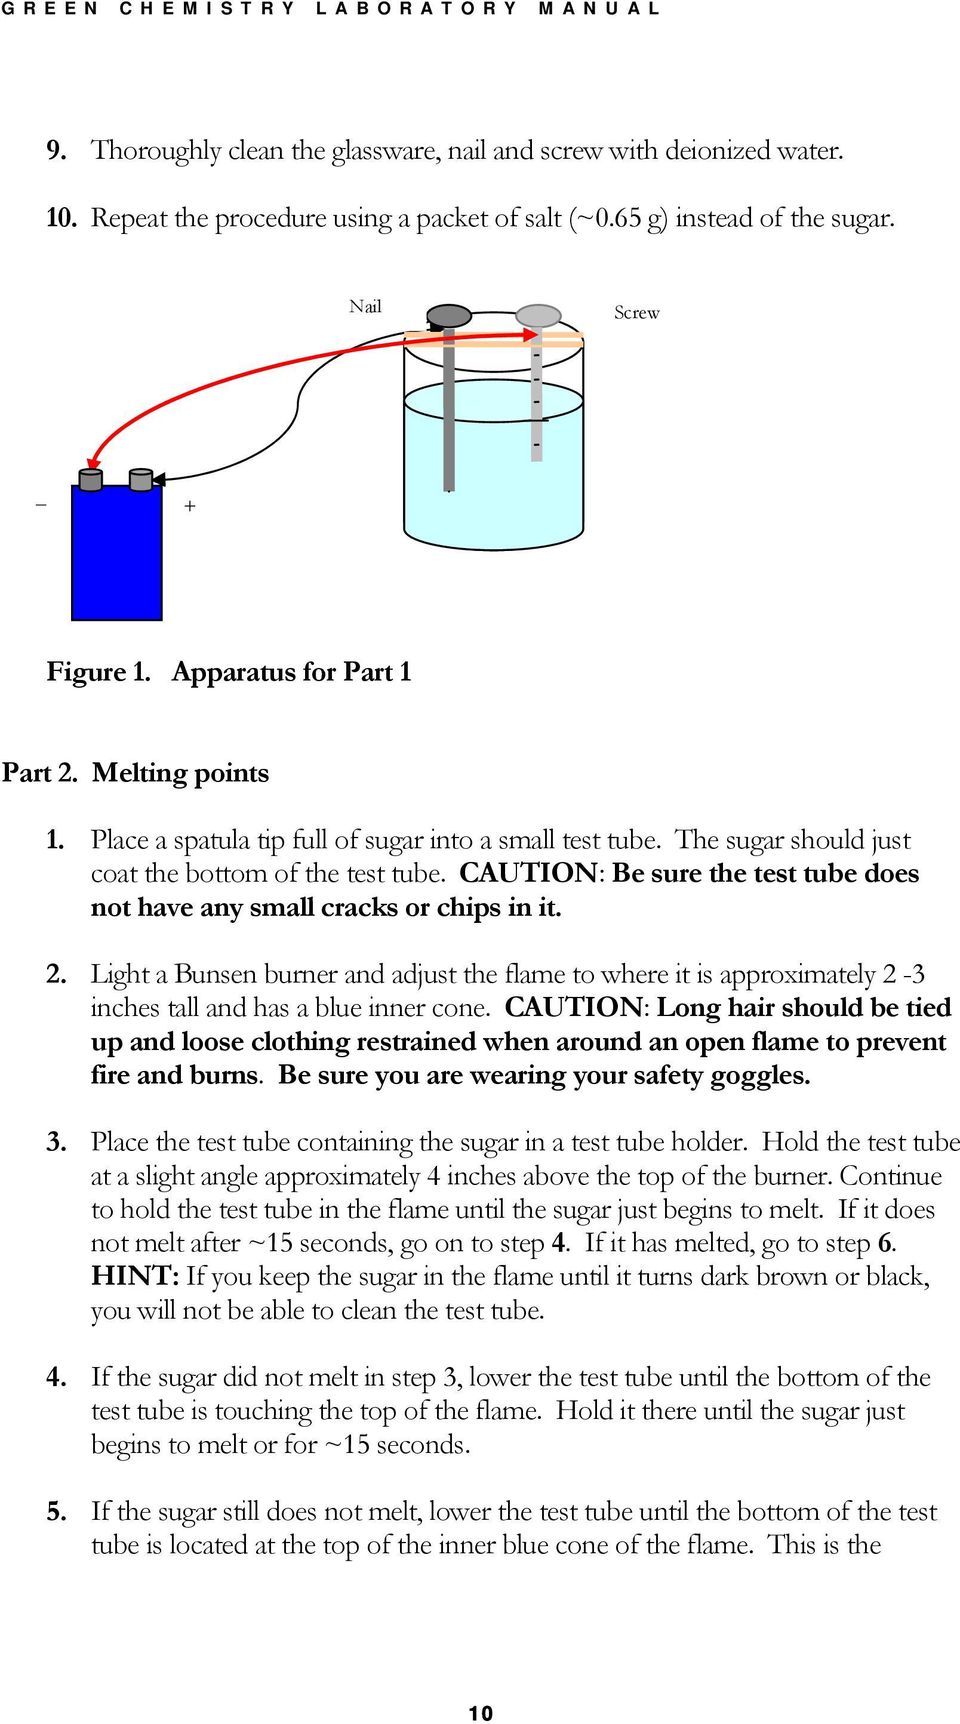 CAUTION: Be sure the test tube does not have any small cracks or chips in it. 2. Light a Bunsen burner and adjust the flame to where it is approximately 2-3 inches tall and has a blue inner cone.